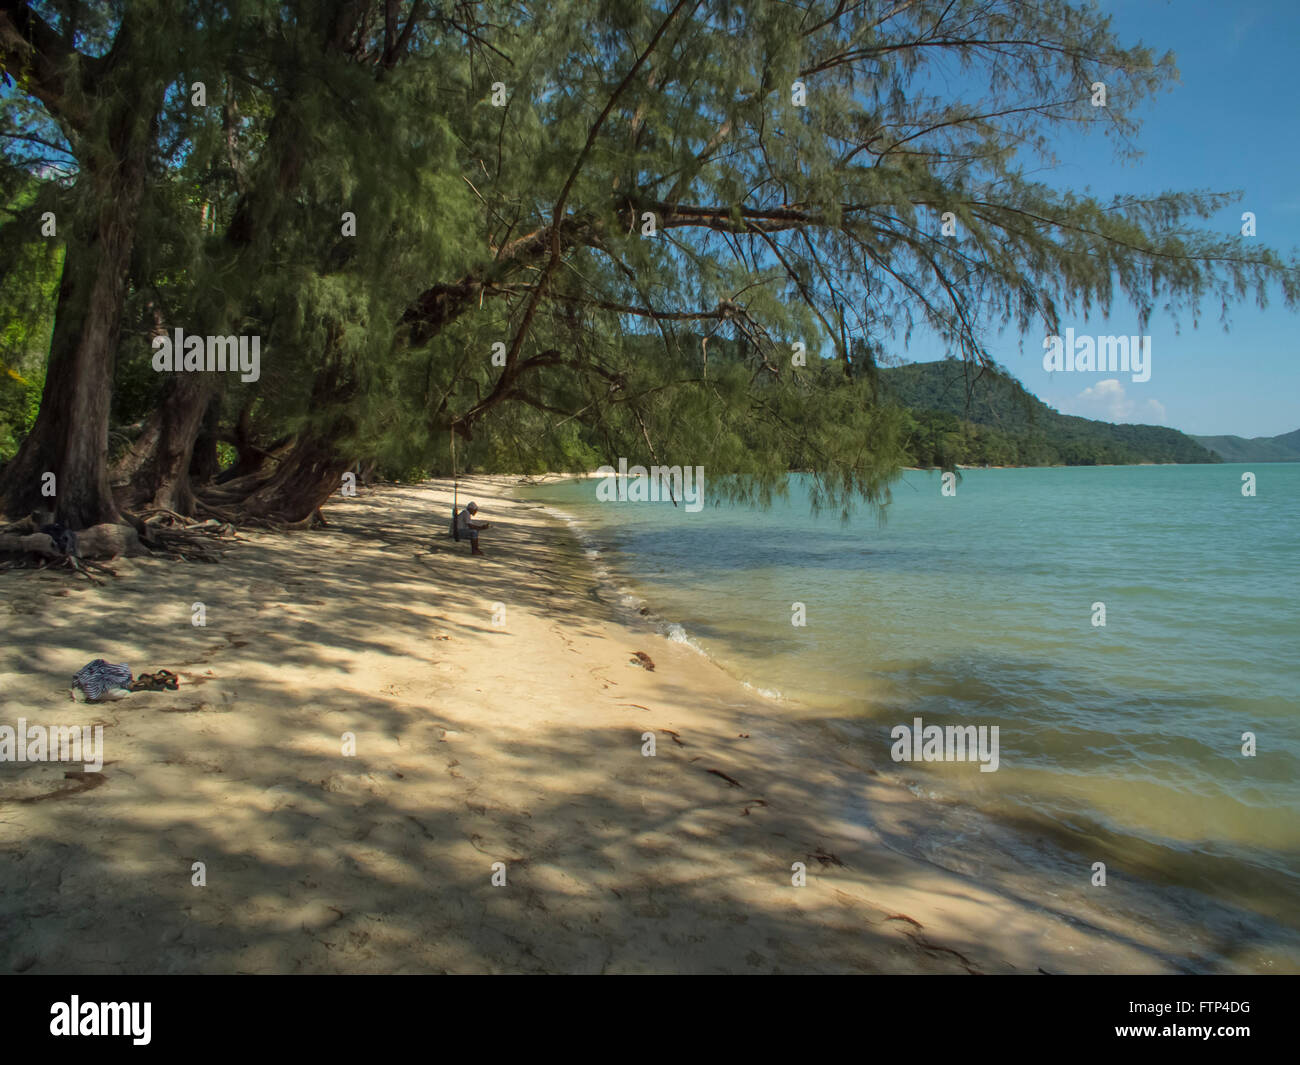 Koh Yao Yai island Thailand, Beach scene and Andaman sea. this beach on Son Bay and the overhanging trees are called Son trees Stock Photo